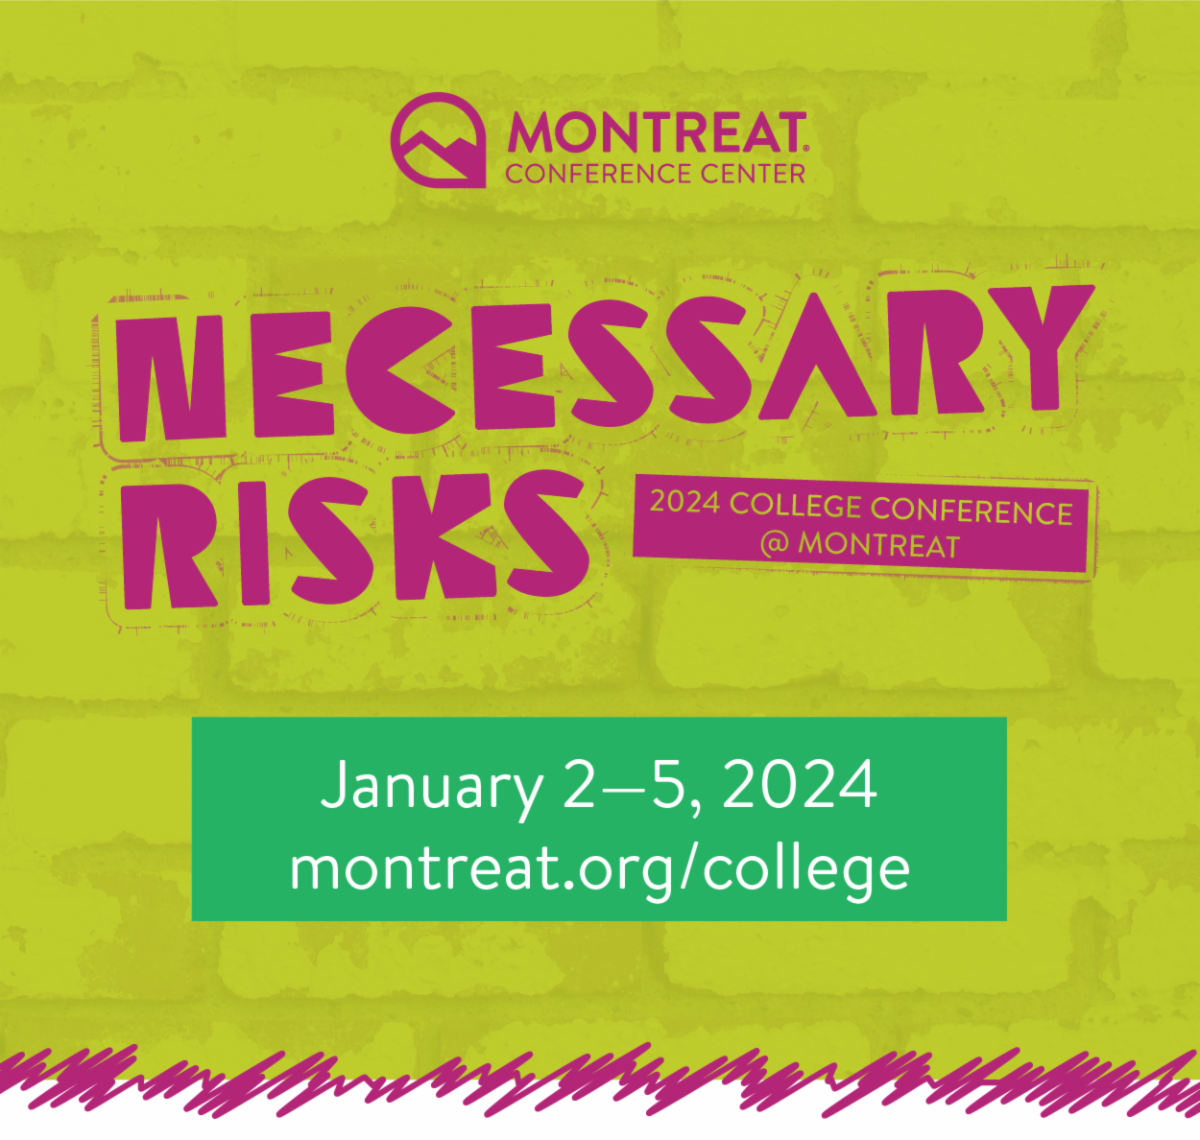 Necessary Risks: 2024 College Conference @ Montreat - January 2-5, 2024, montreat.org/college